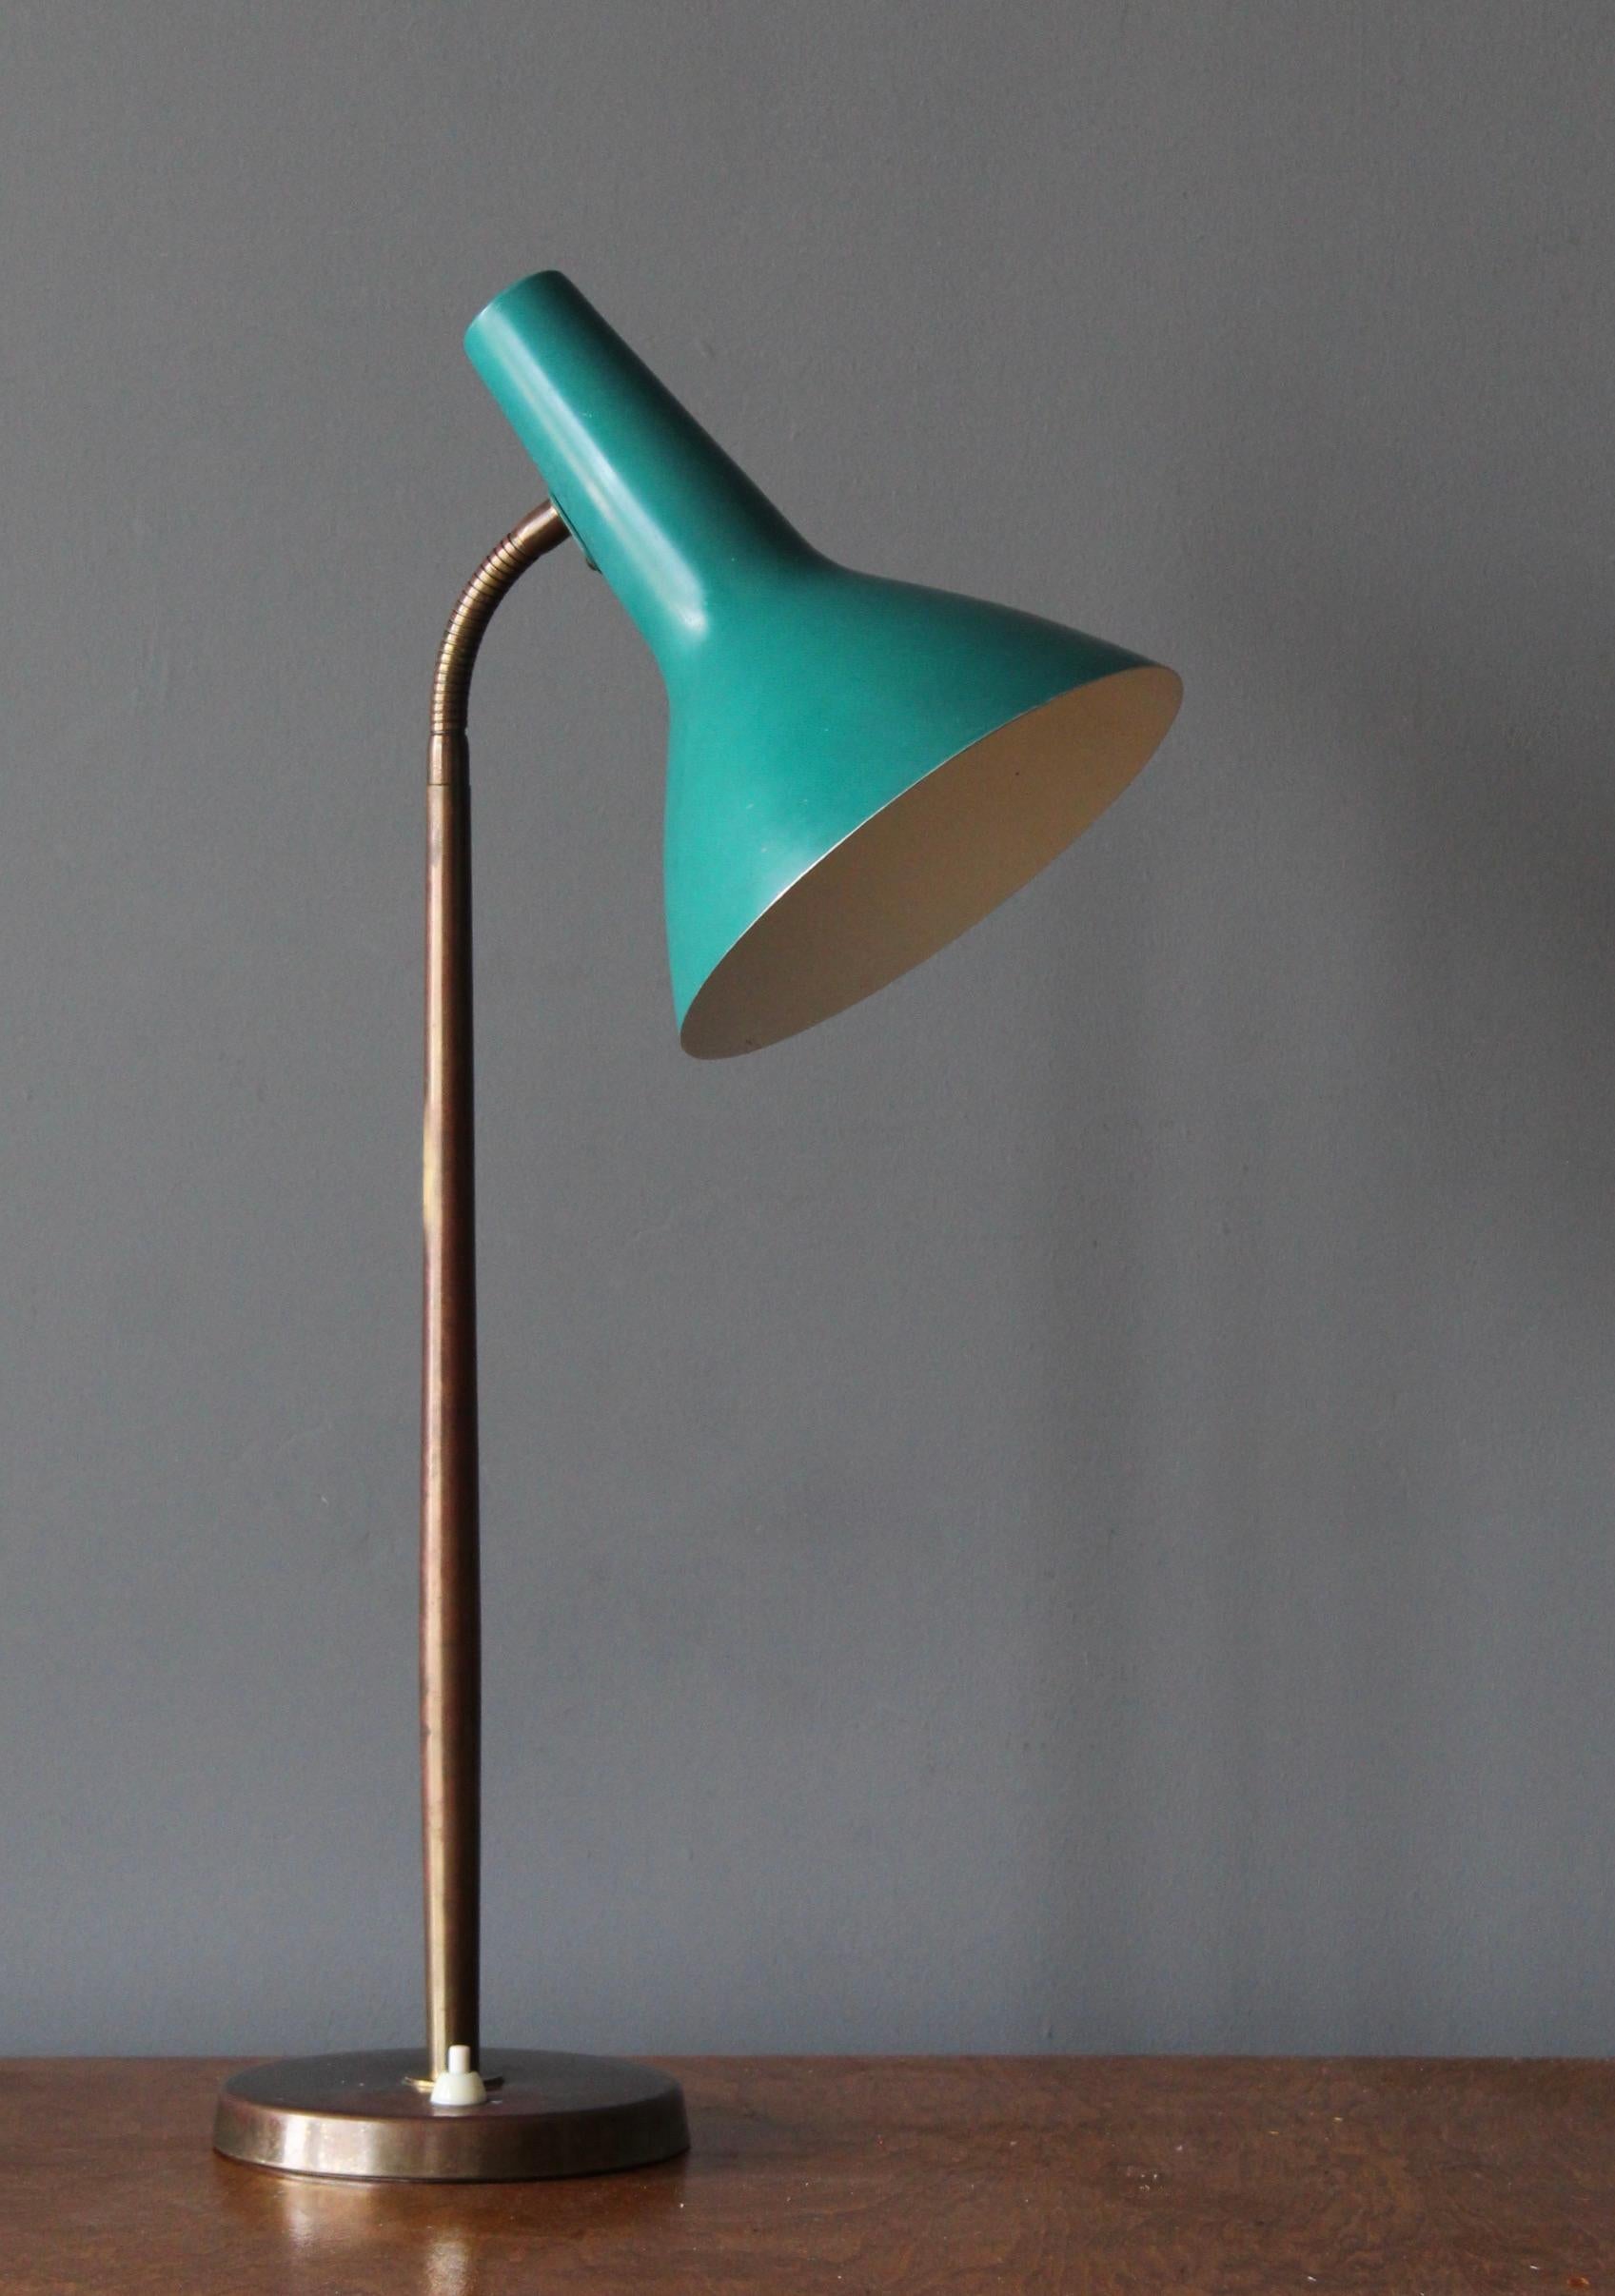 An adjustable table lamp. Designed by Harald Notini. Manufactured by Böhlmarks Lampfabrik, Sweden, 1940s. Brass and lacquered metal. Documented and stamped with makers mark and model number to underside.

Other designers of the period include